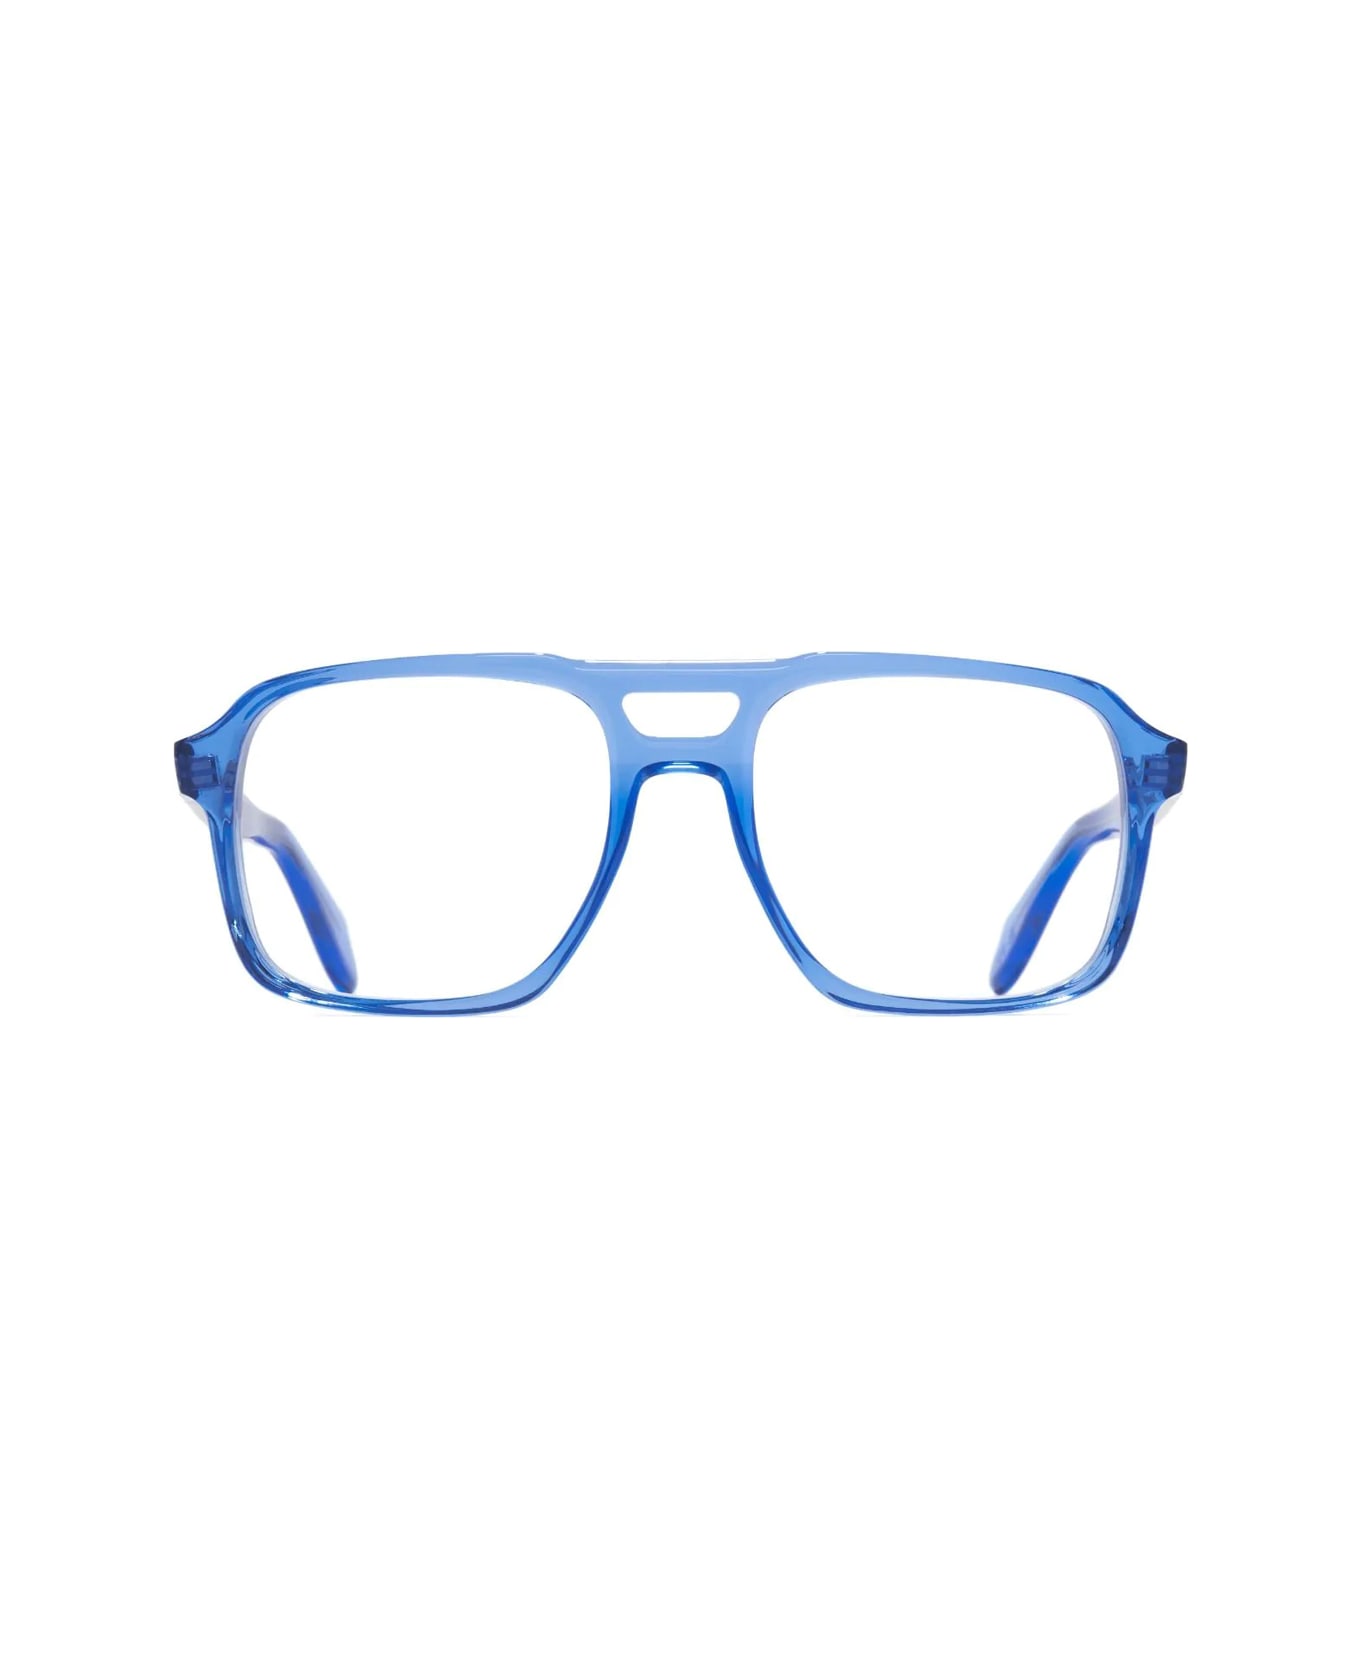 Cutler and Gross 1394 A7 Glasses - Blu アイウェア